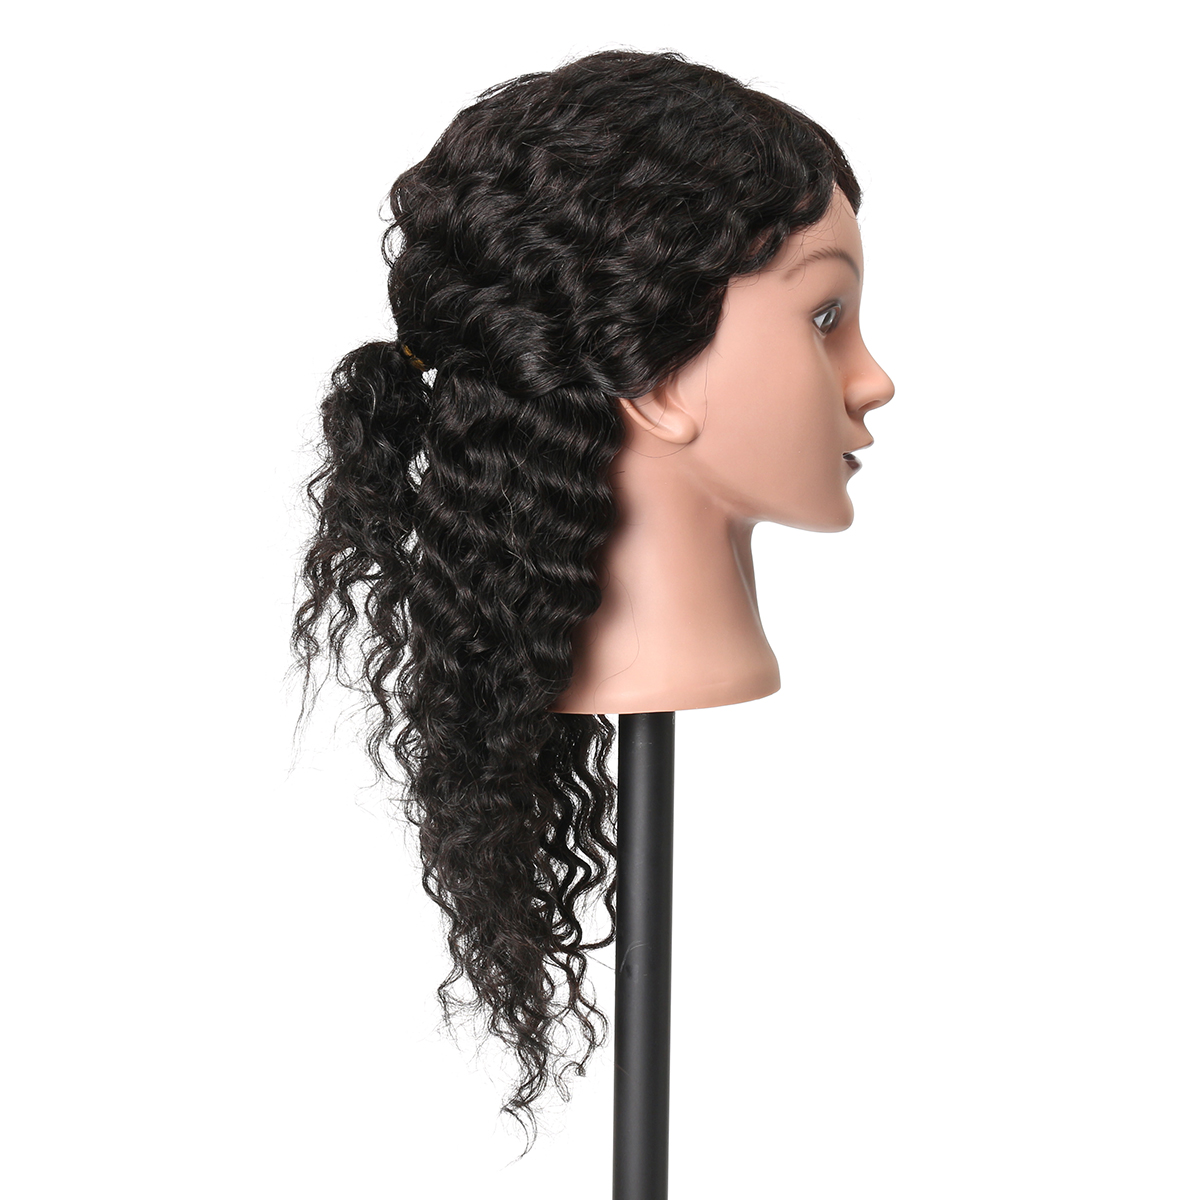 18-100-Real-Human-Hair-Salon-Hairdressing-Training-Practice-Mannequin-Head-1384713